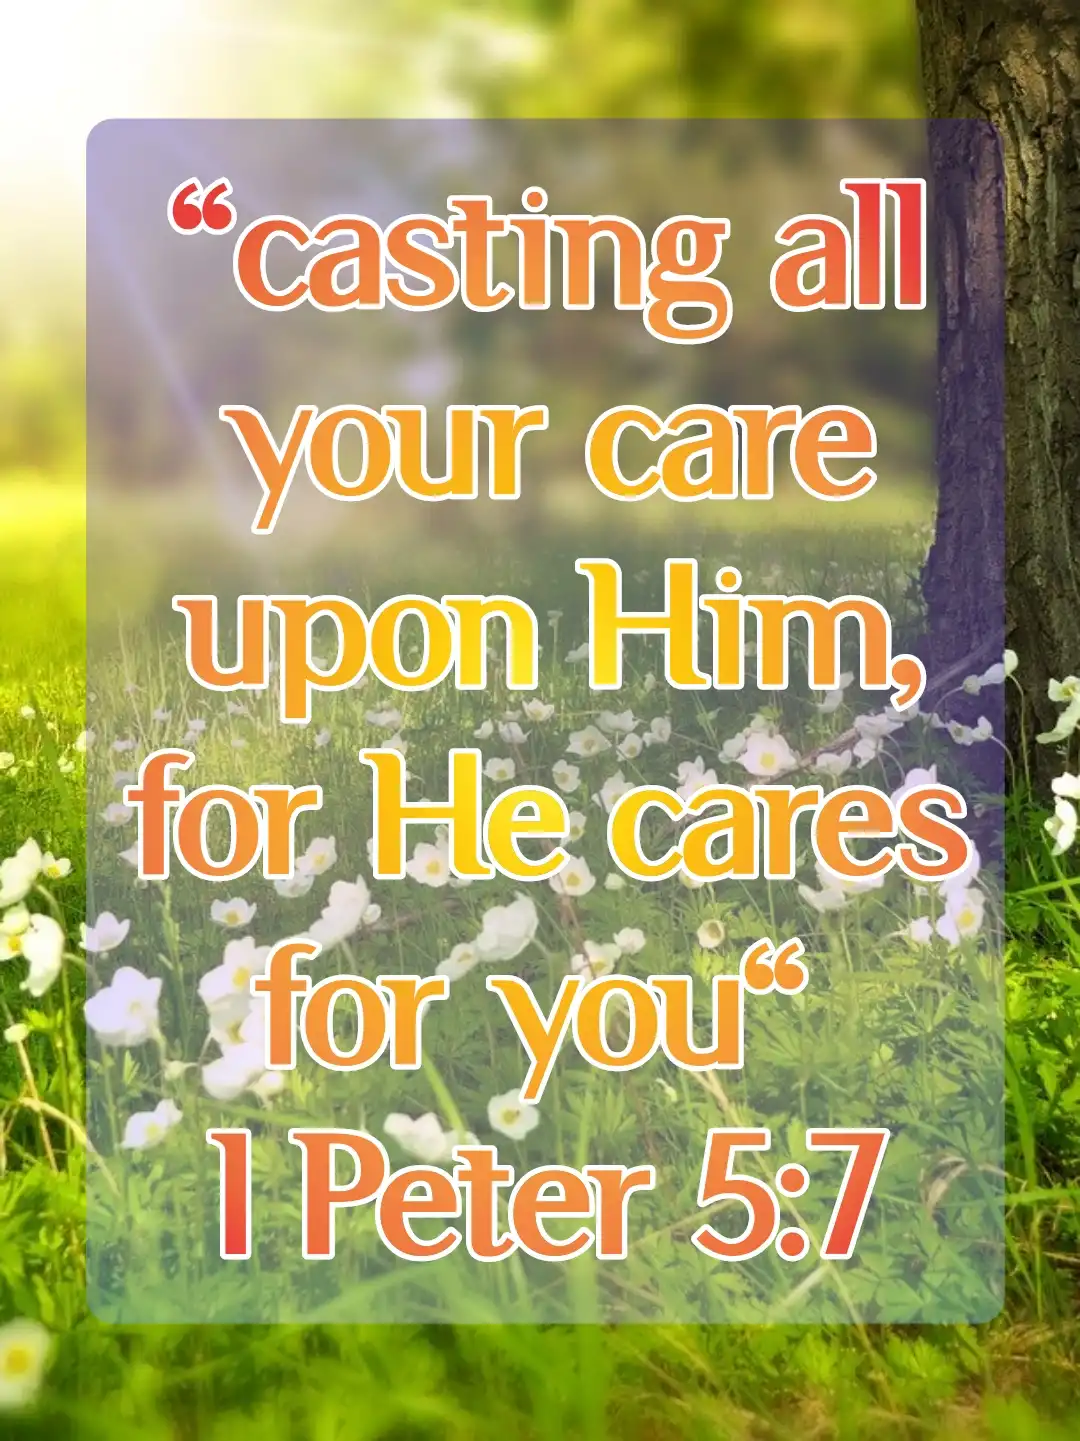 bible verses about encouraging others (1 Peter 5:7)